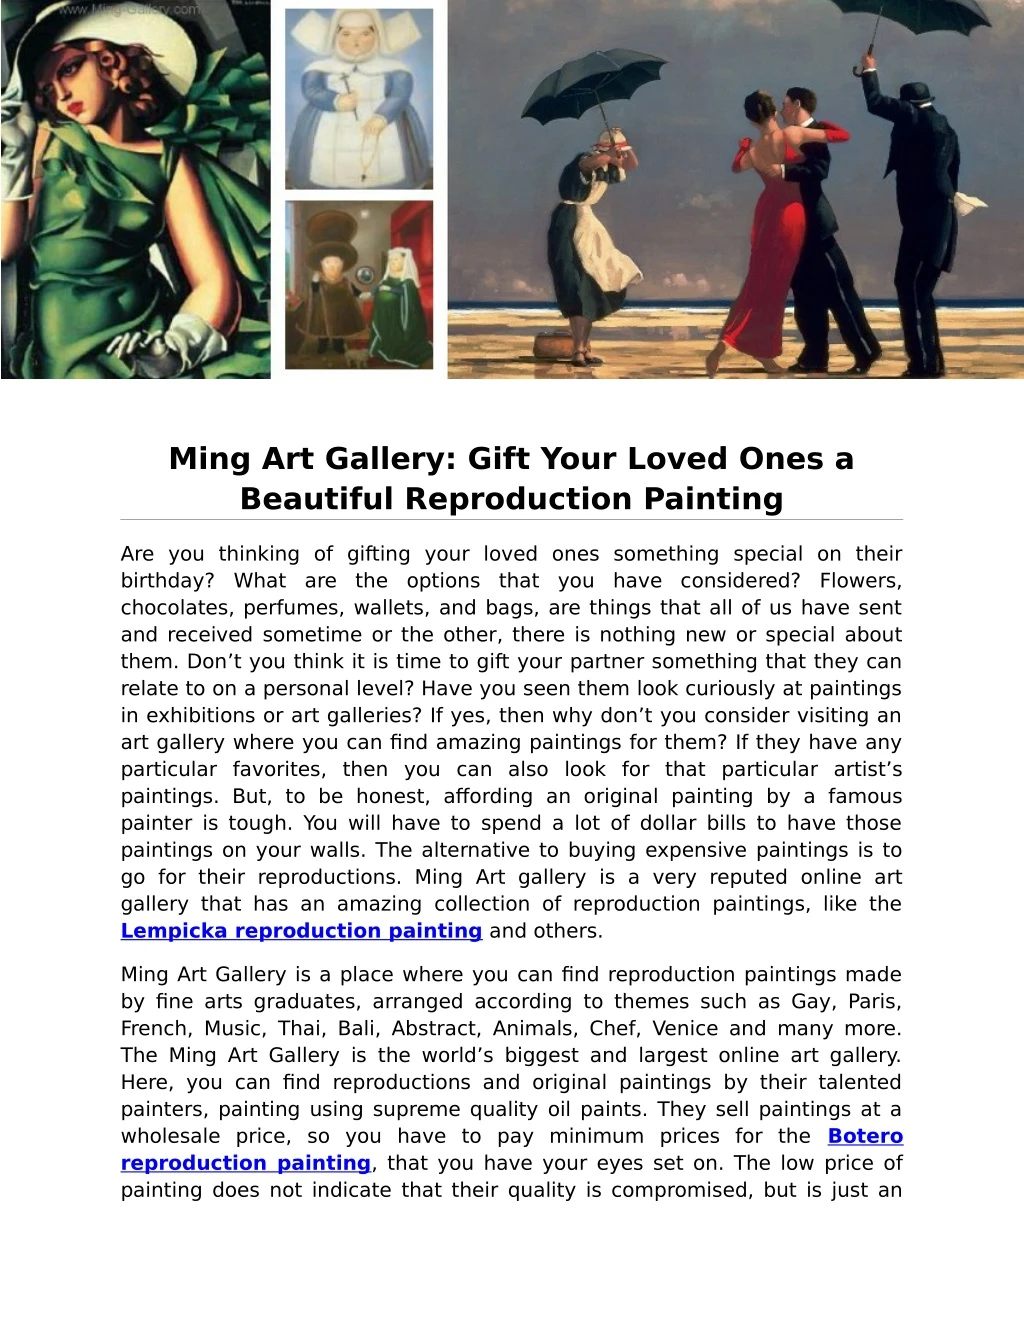 ming art gallery gift your loved ones a beautiful